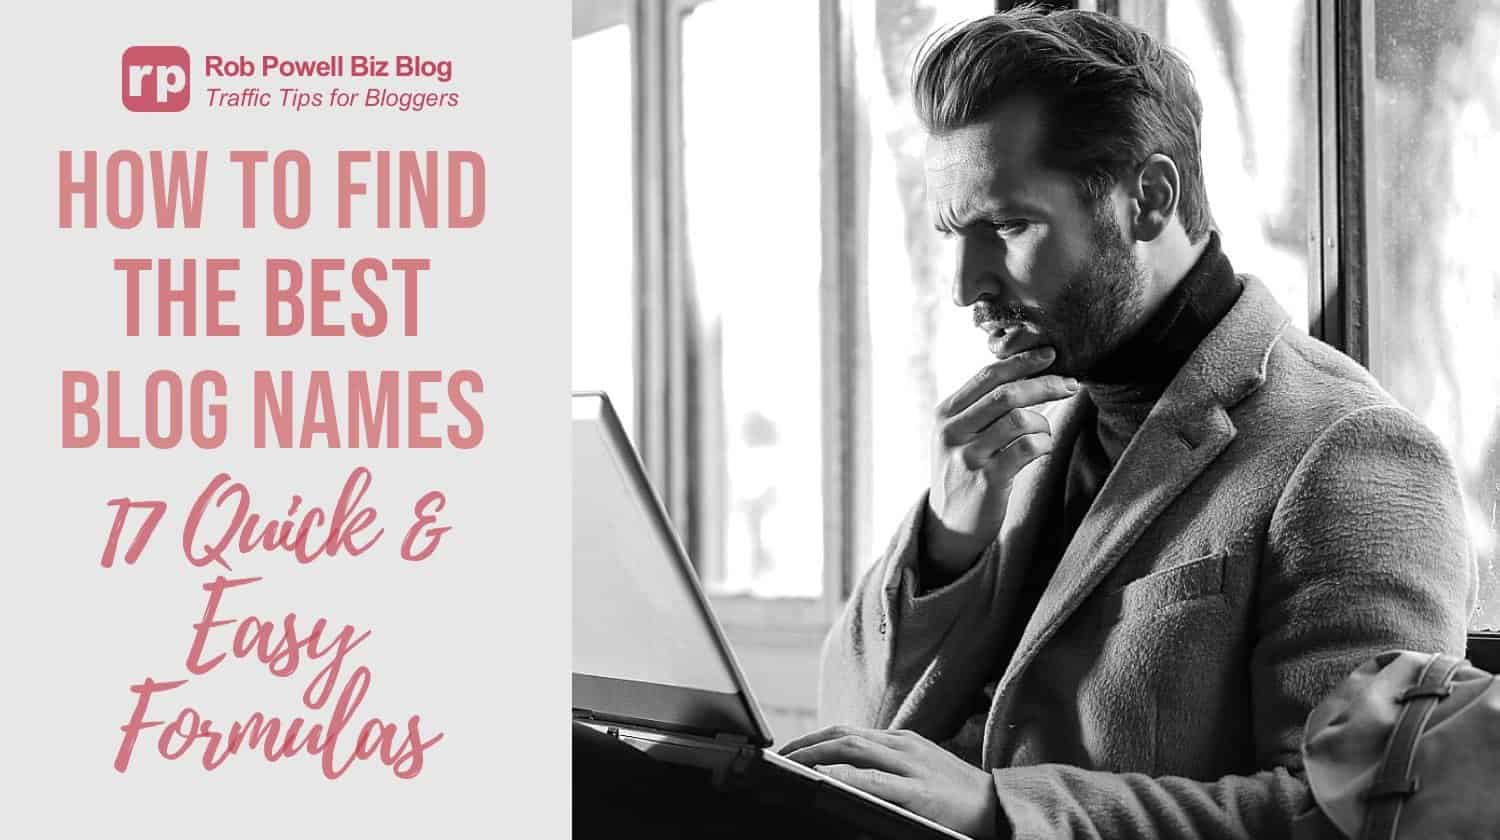 How To Find The Best Blog Names 19 Quick Easy Formulas